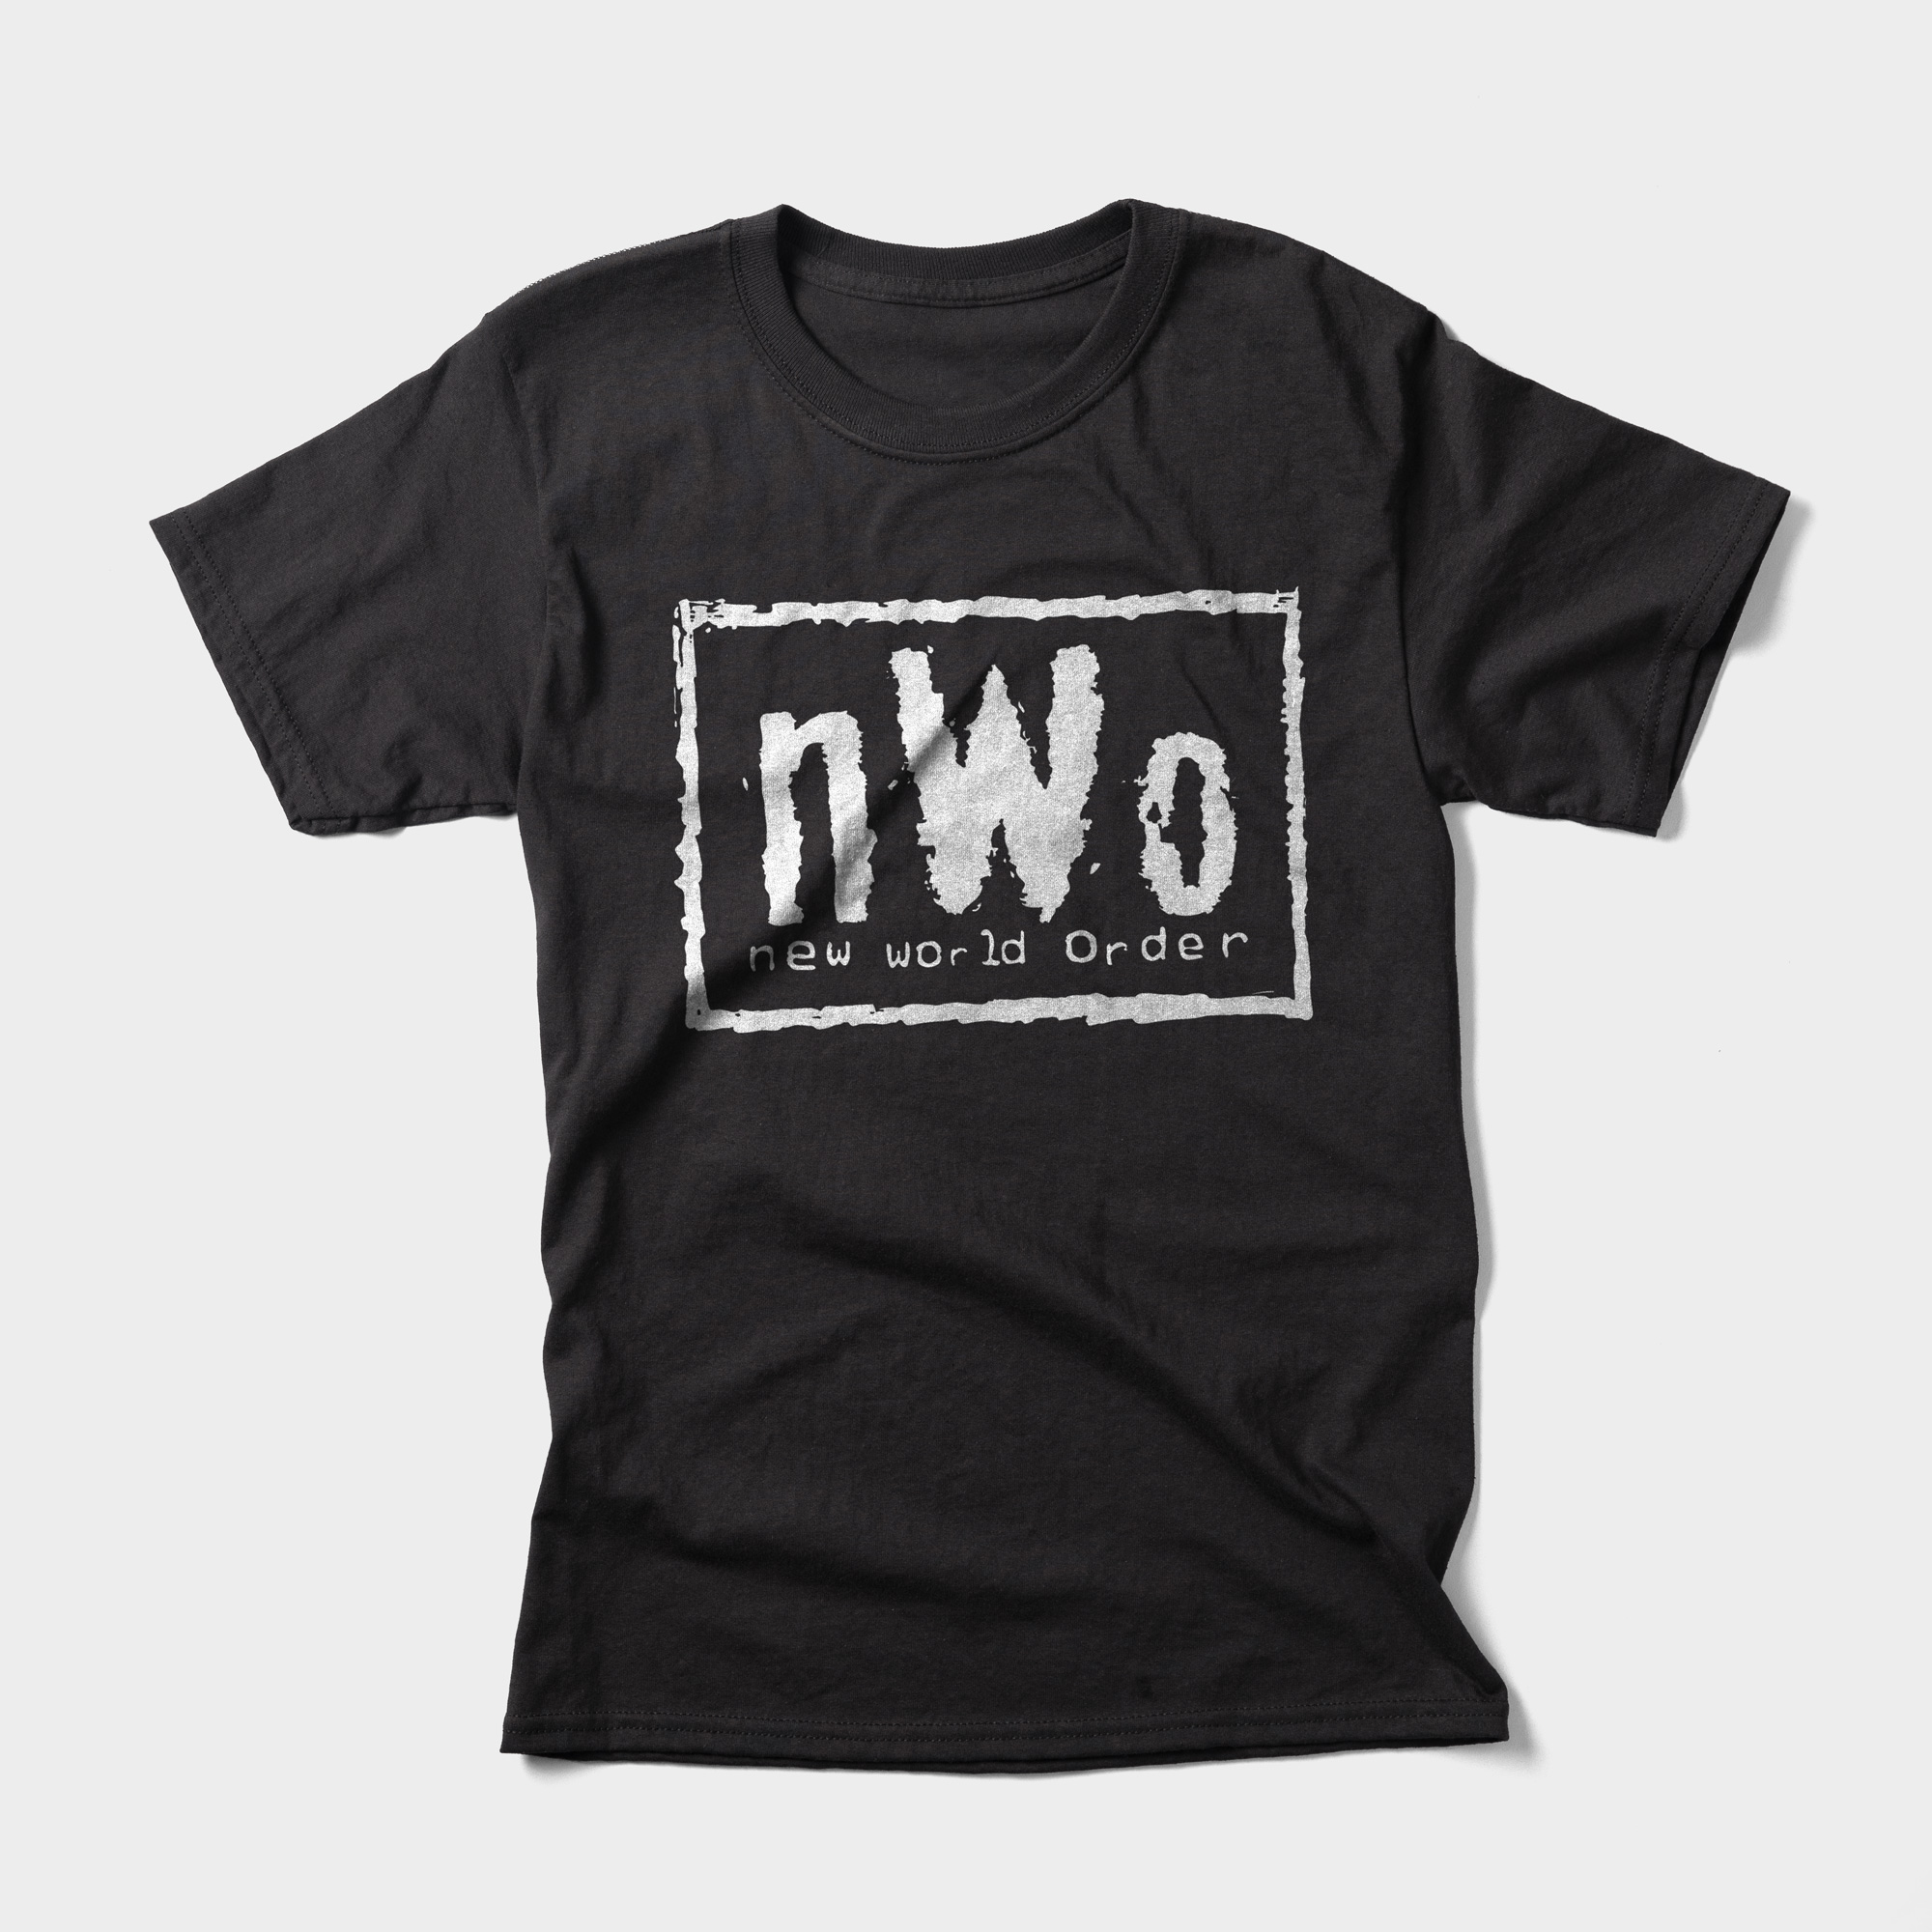 New World Order's t-shirt logo didn't need to be flashy to make an impact on the entire sport.